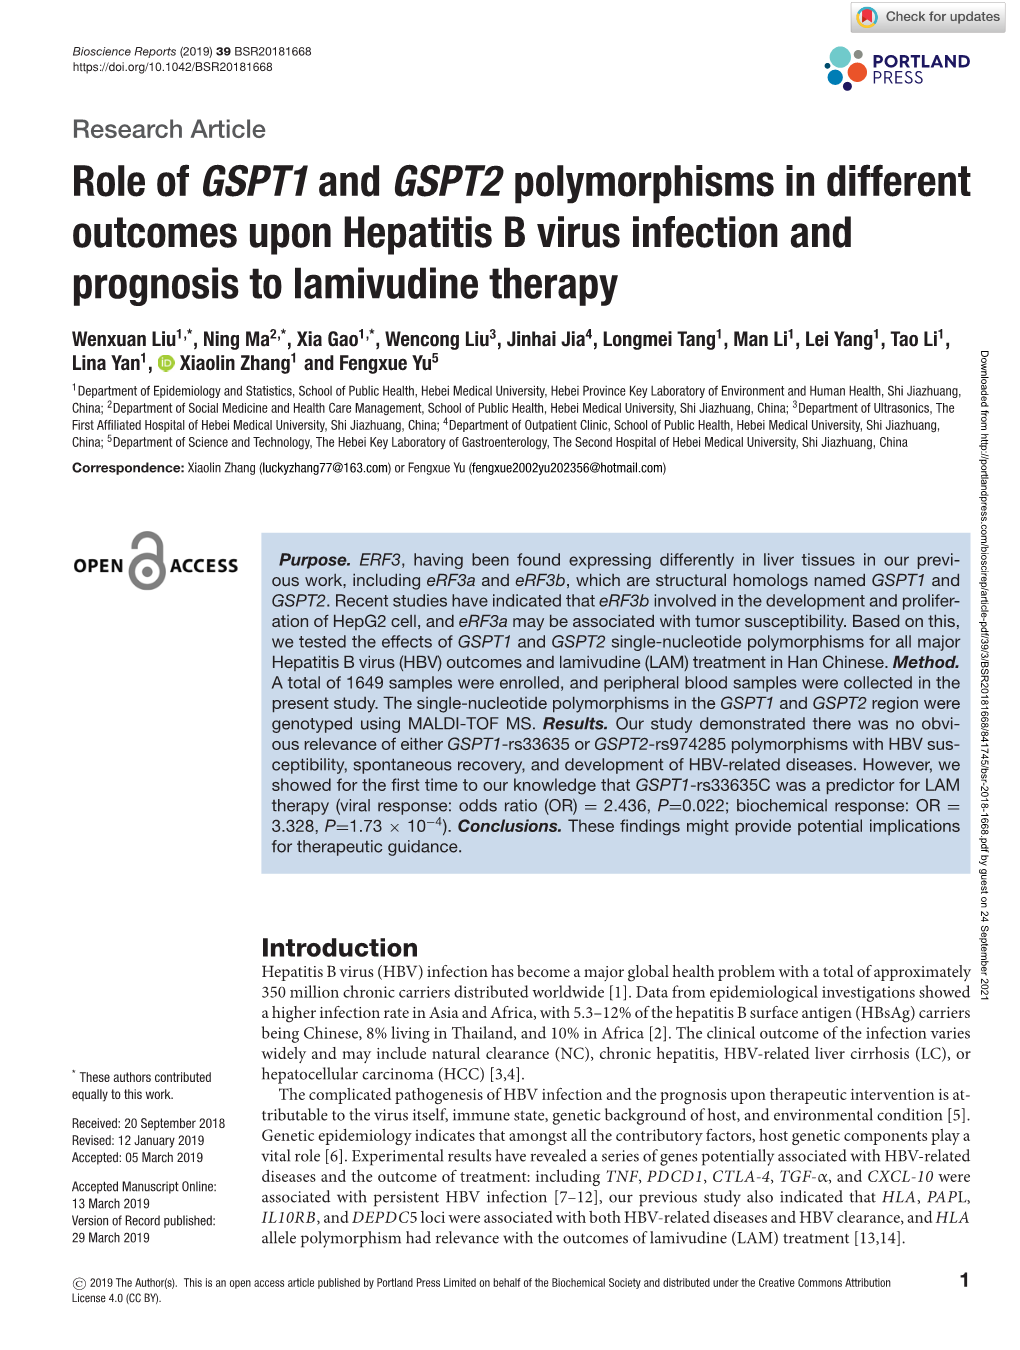 Role of GSPT1 and GSPT2 Polymorphisms in Different Outcomes Upon Hepatitis B Virus Infection and Prognosis to Lamivudine Therapy